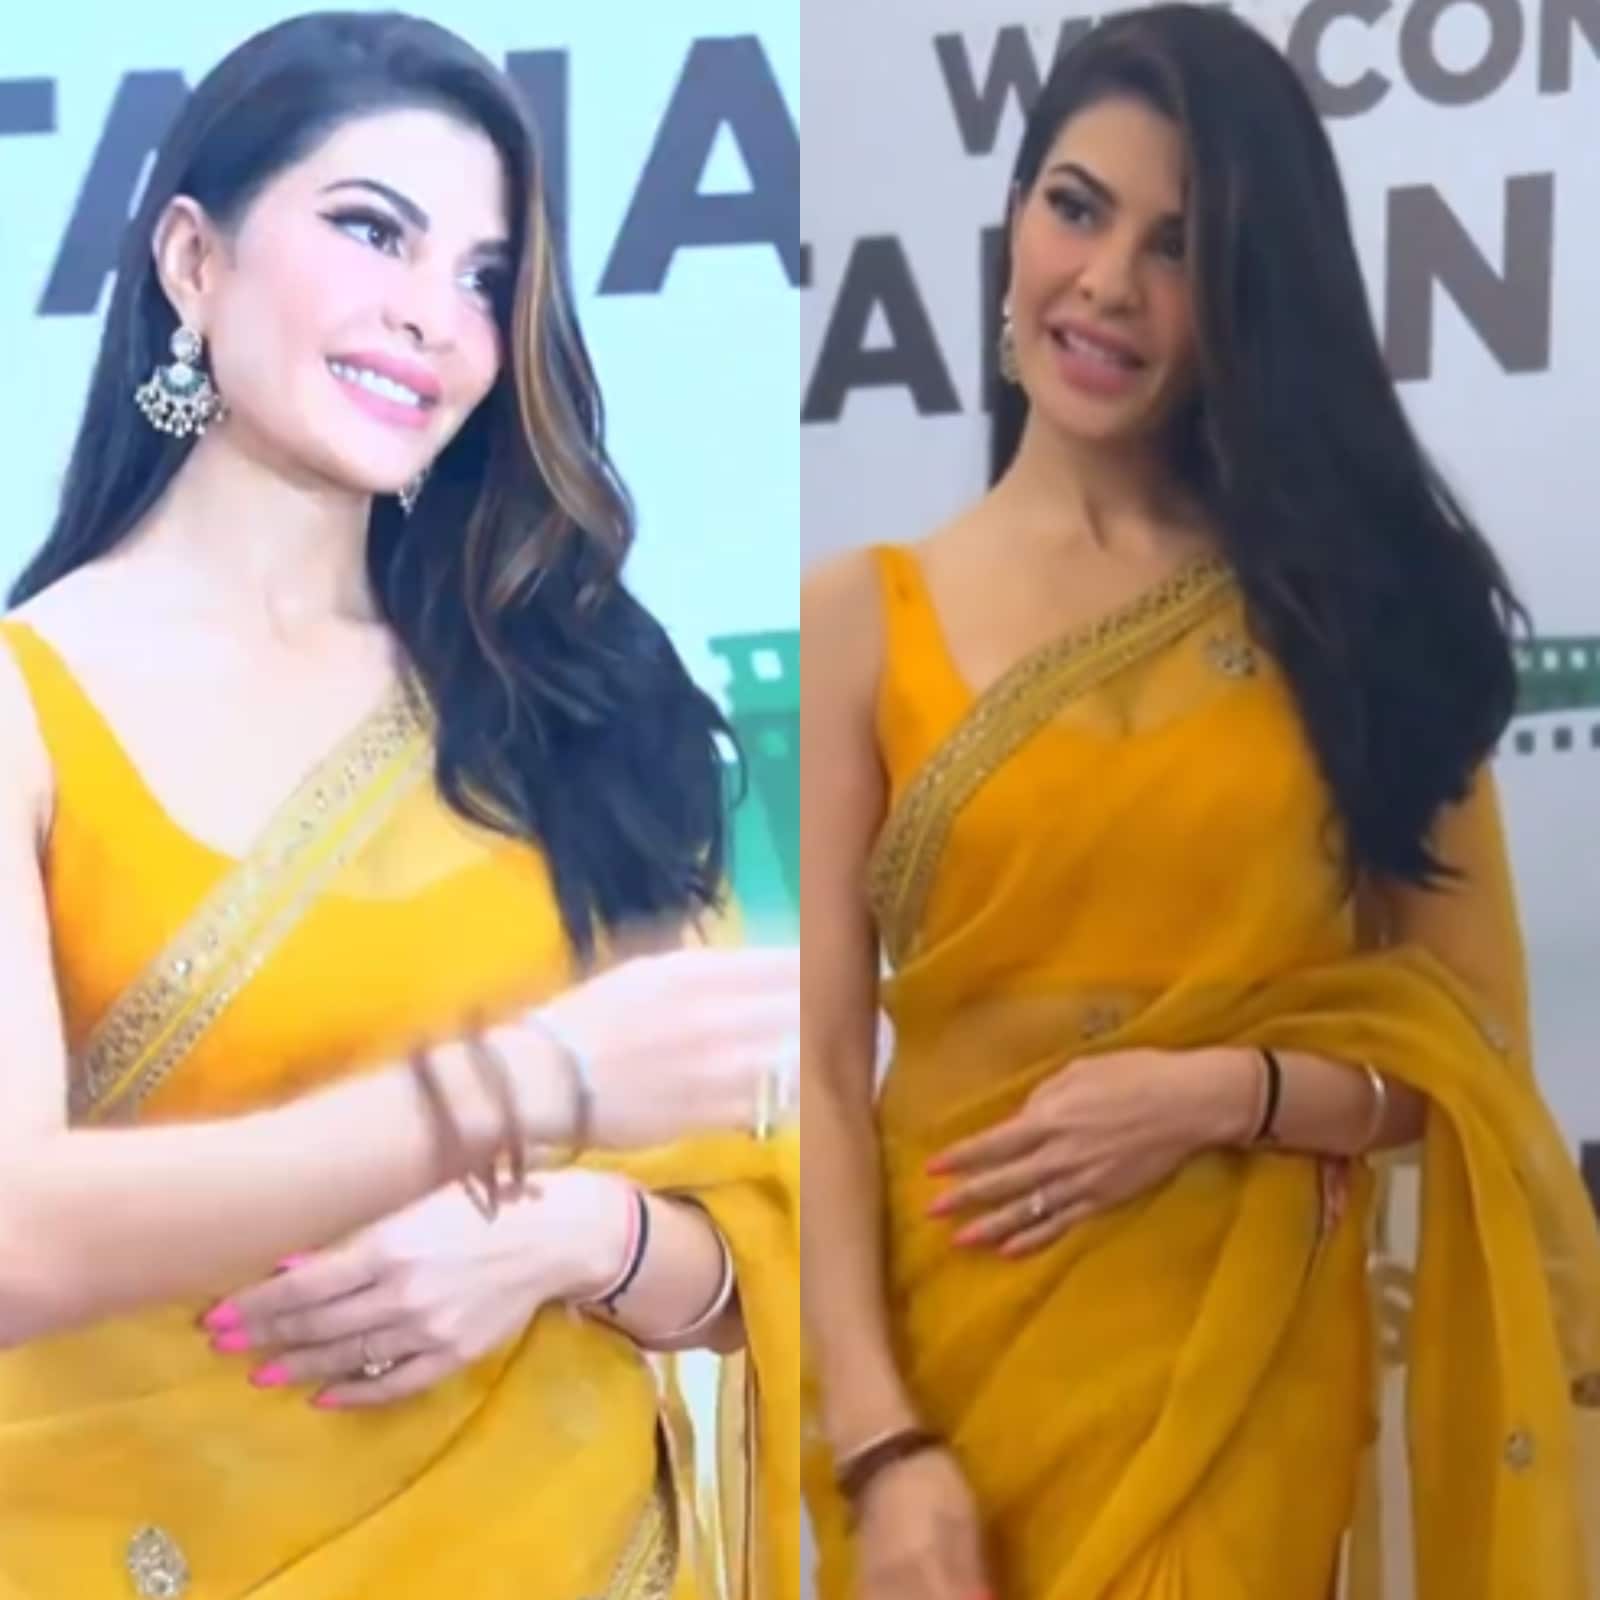 Jacquline Naked Bollywood Actress - Jacqueline Fernandez Makes Rare Public Appearance Amid Conman Sukesh Row,  Stuns in Saree